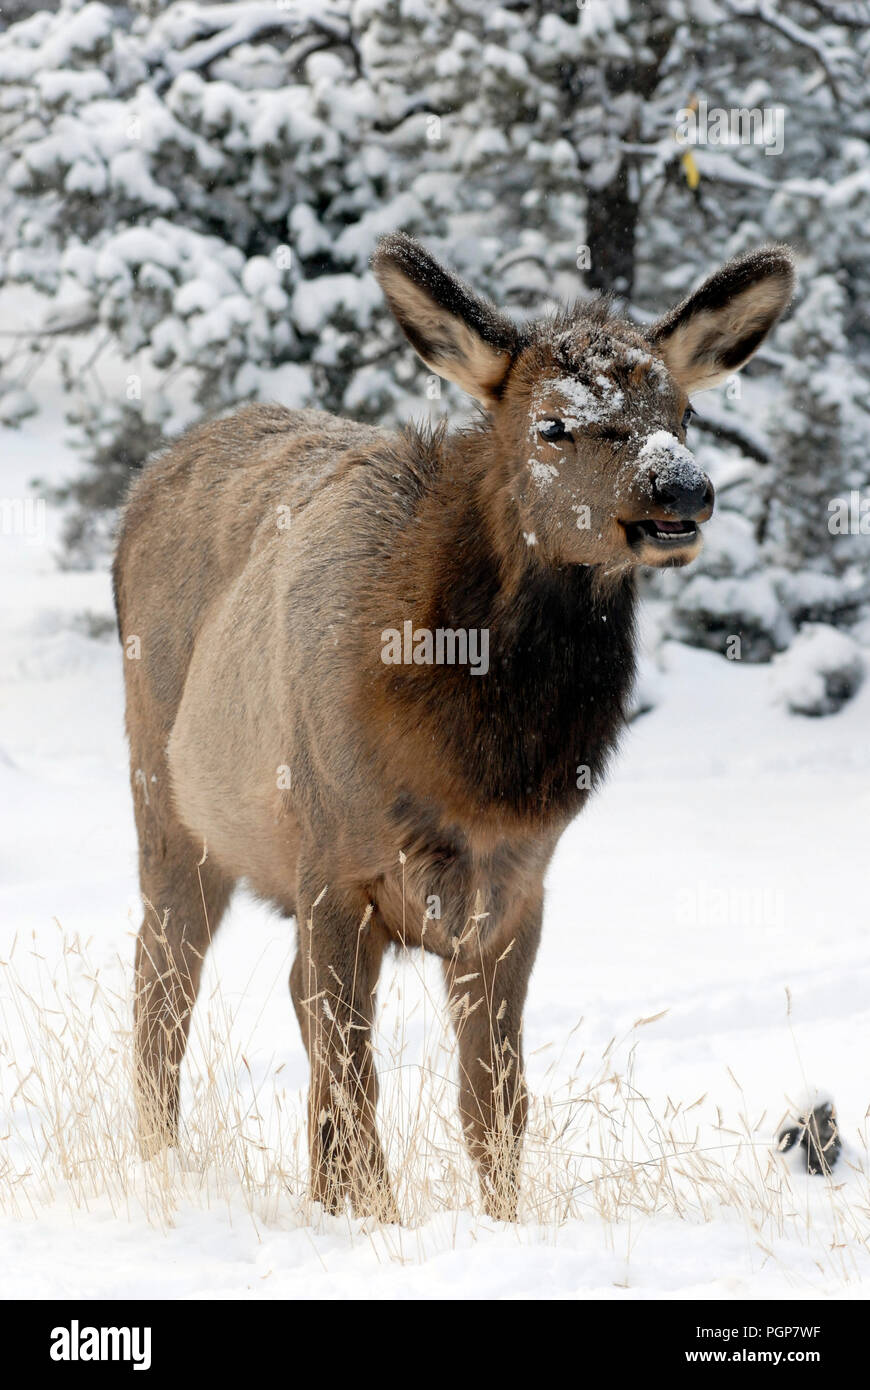 An elk, its face covered in snow, looks up while grazing at the South Rim of Grand Canyon National Park in Arizona following a winter storm. Stock Photo